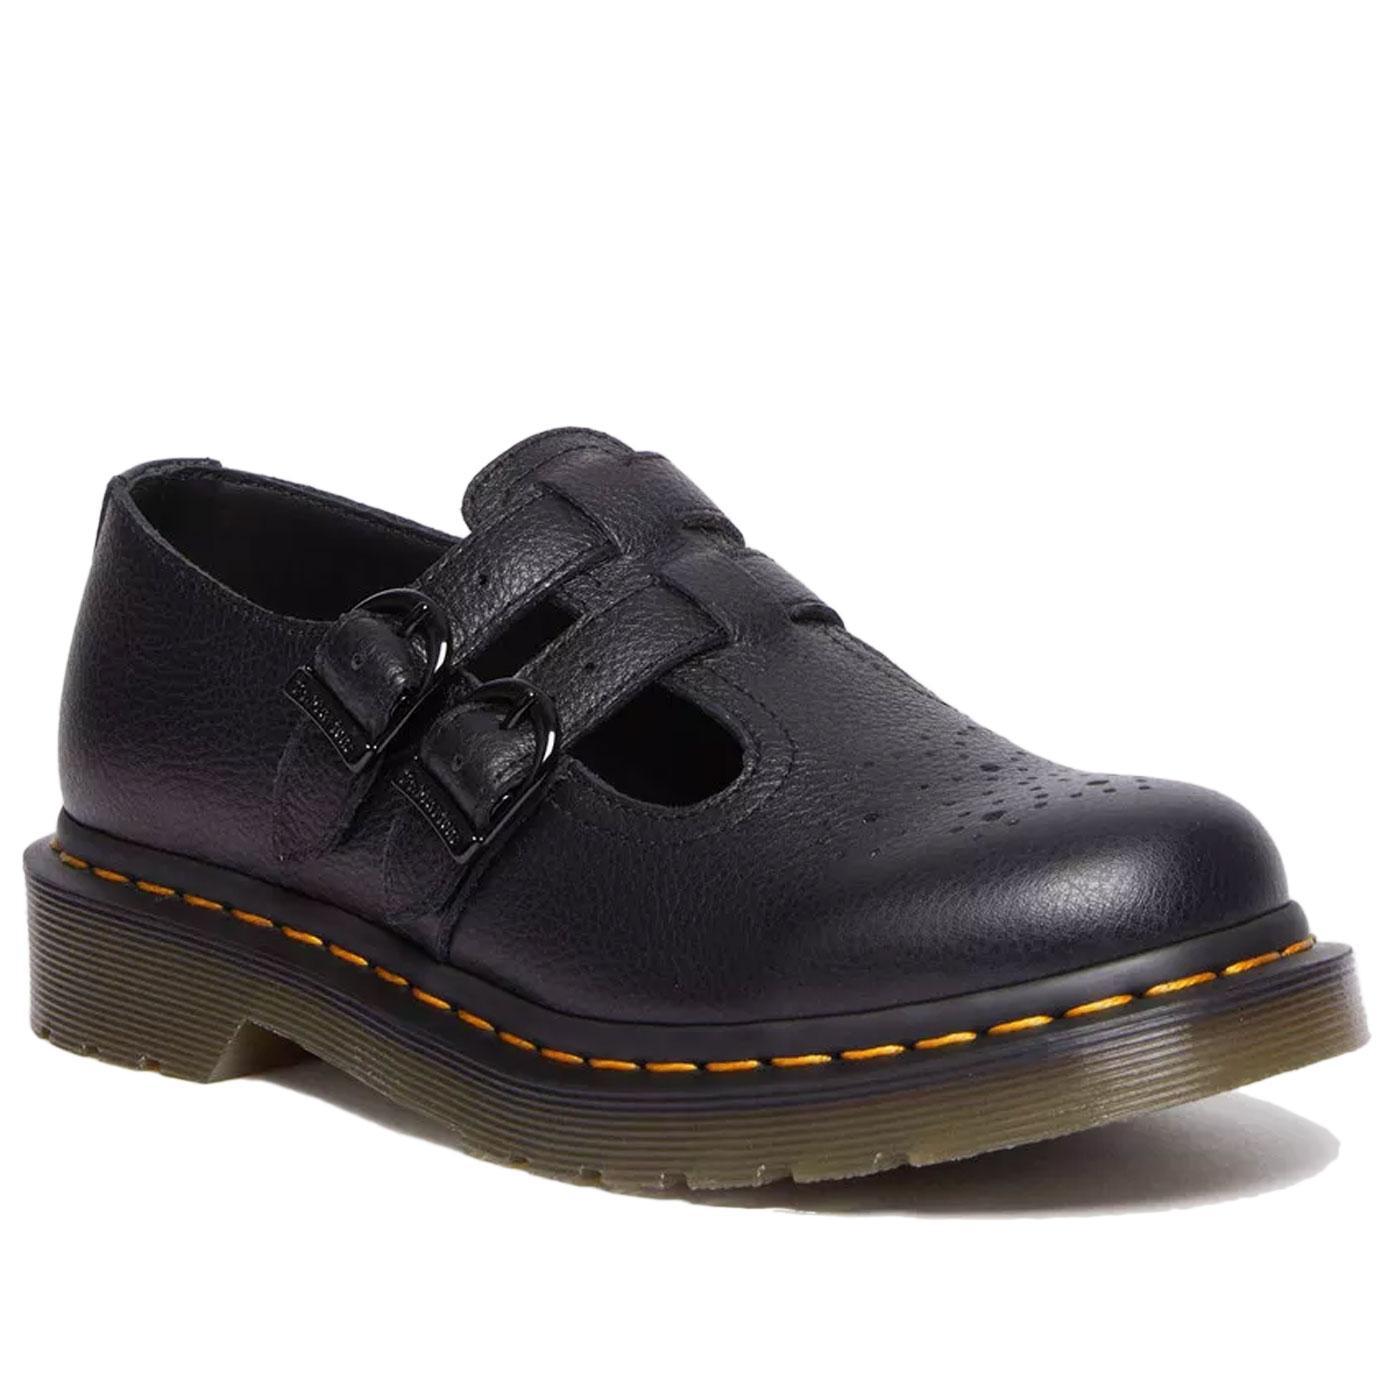 Mary Jane DR MARTENS Tumbled Leather Shoes B